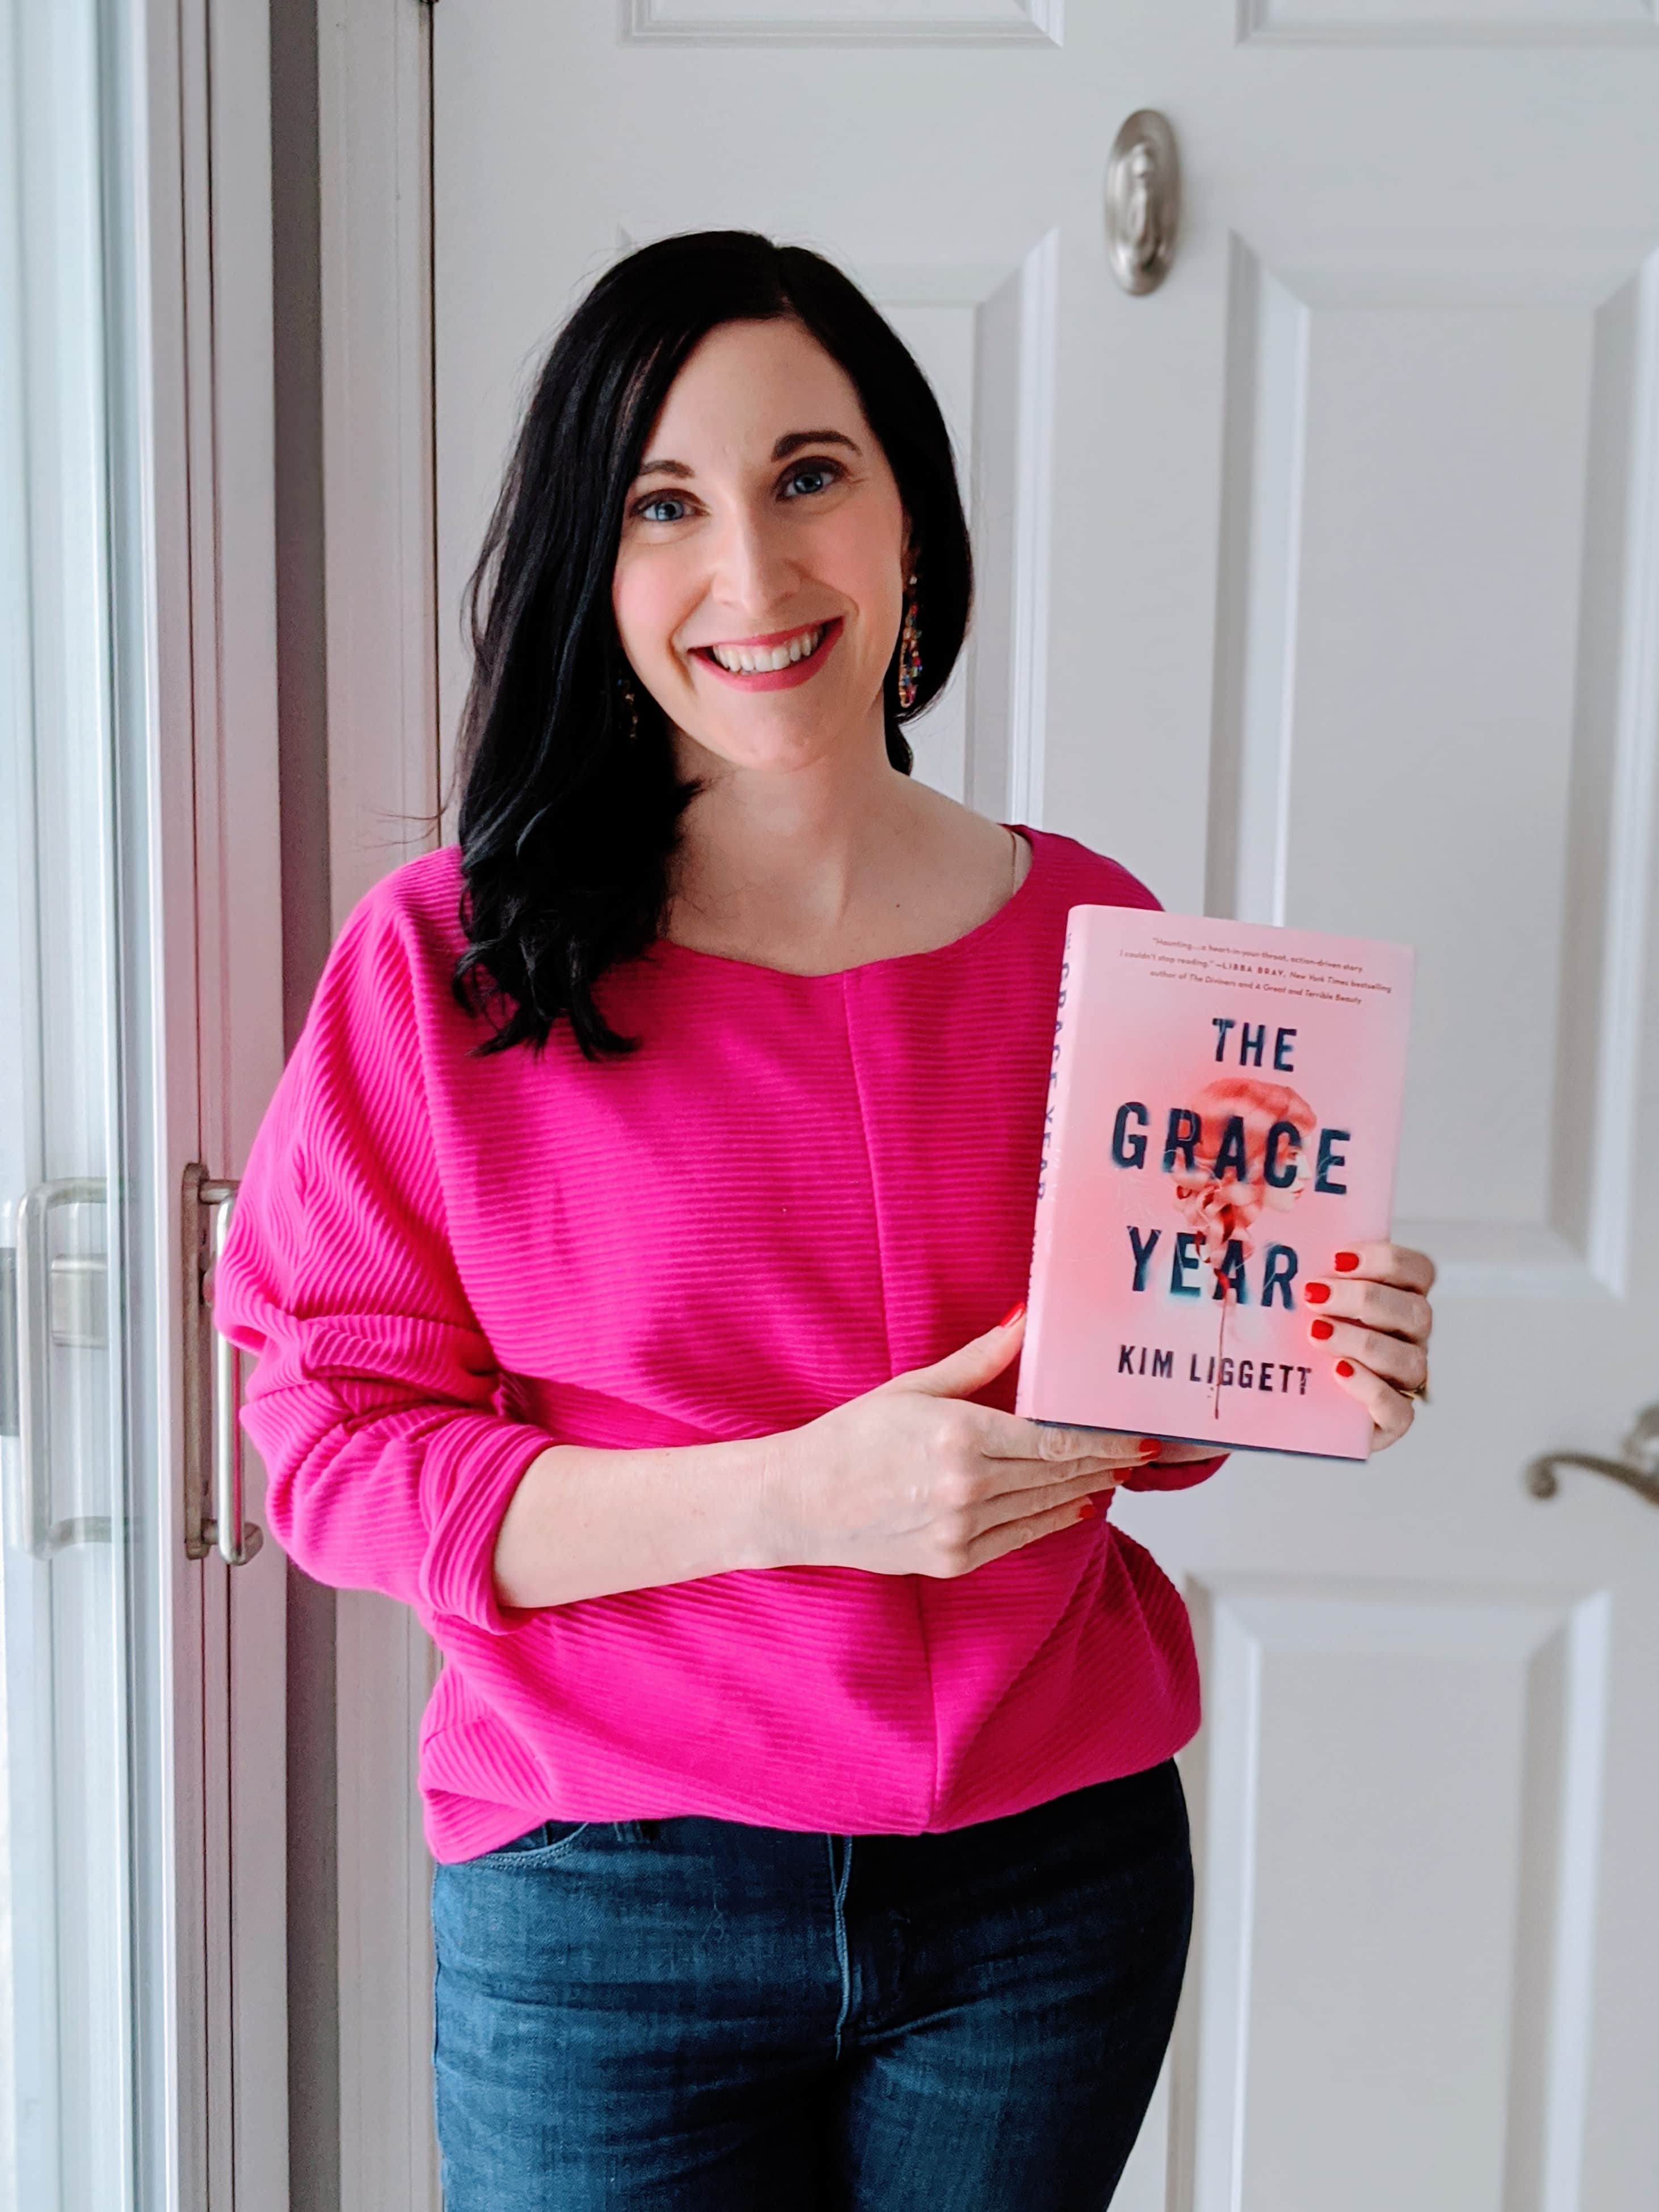 January Book Club: The Grace Year by Kim Liggett